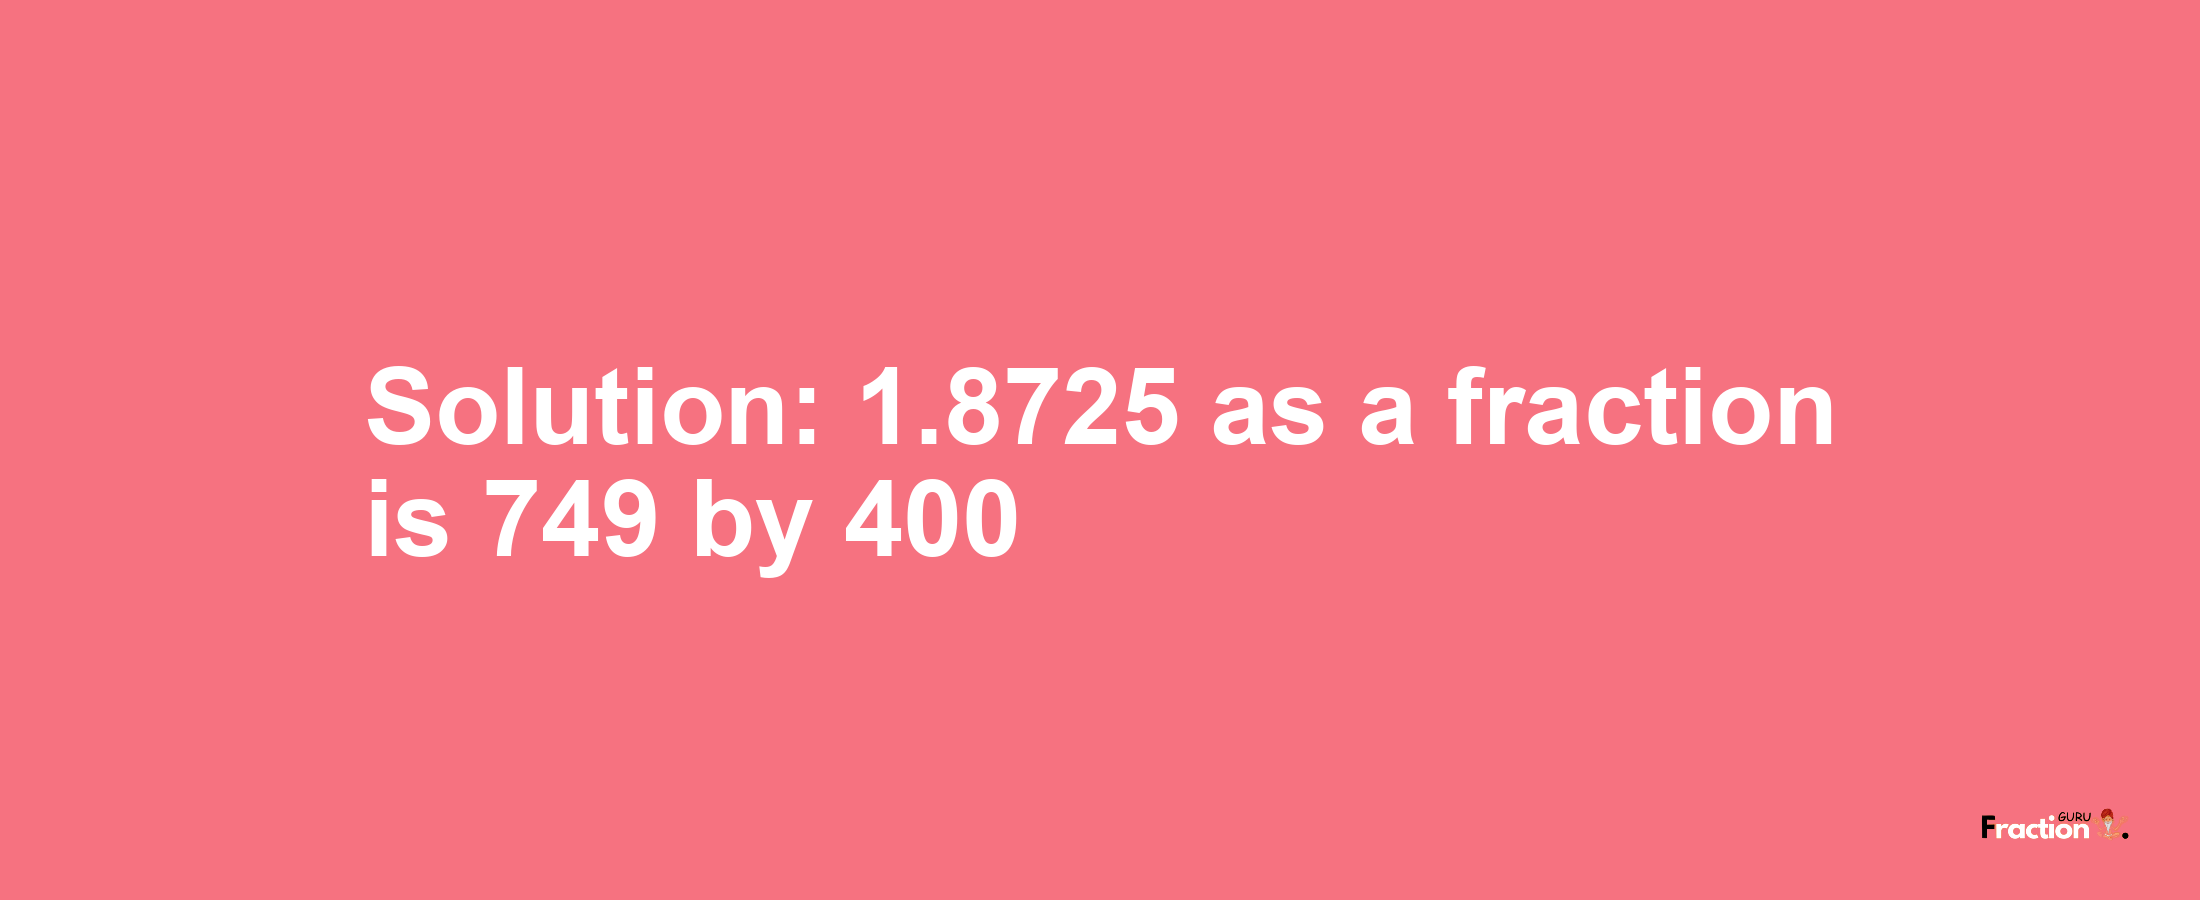 Solution:1.8725 as a fraction is 749/400